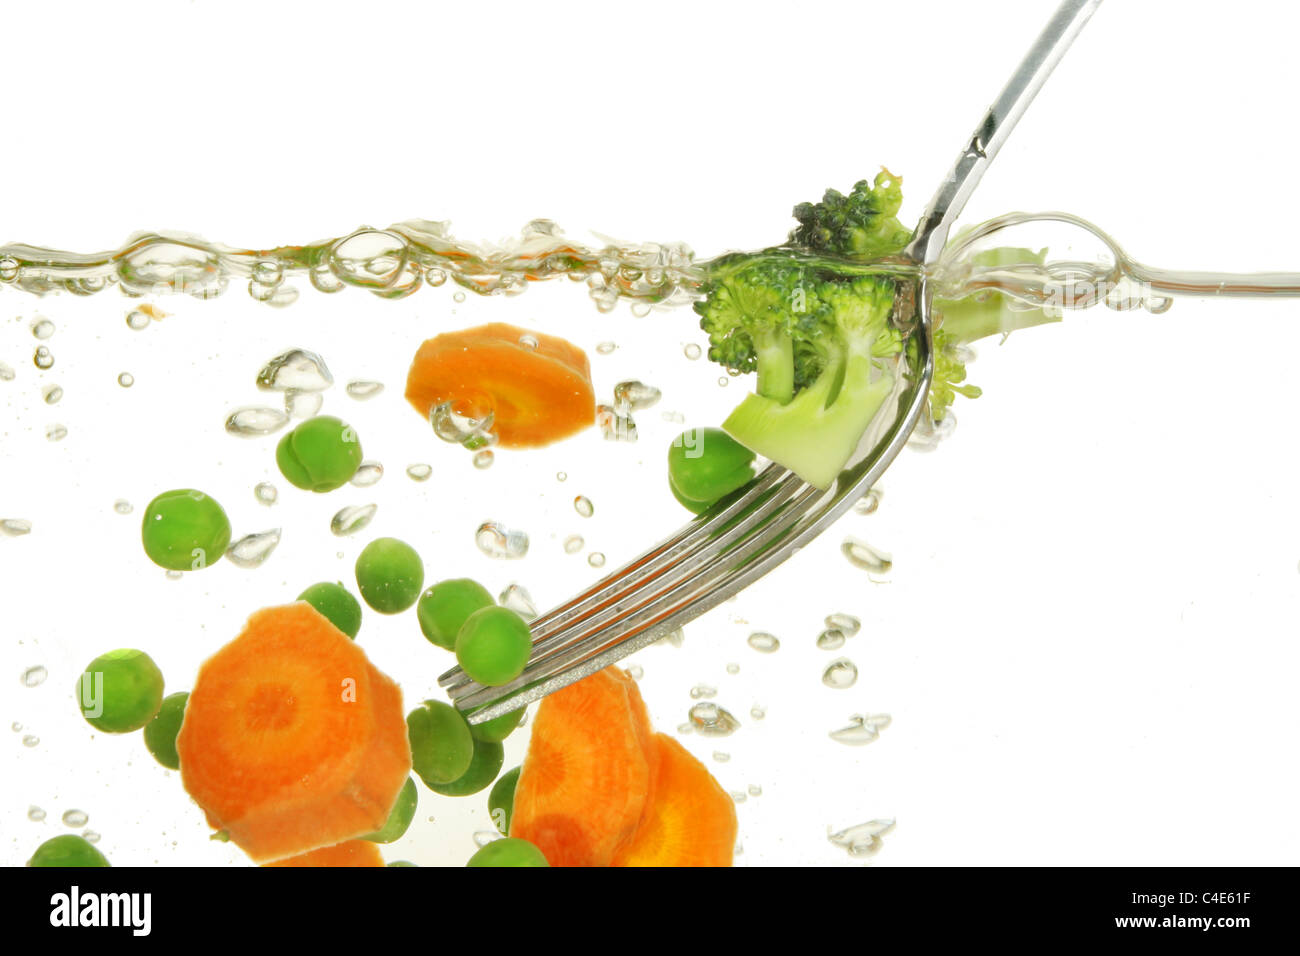 Carrots, peas and brocolli vegetables cooking in boiling water with a stainless steel fork Stock Photo